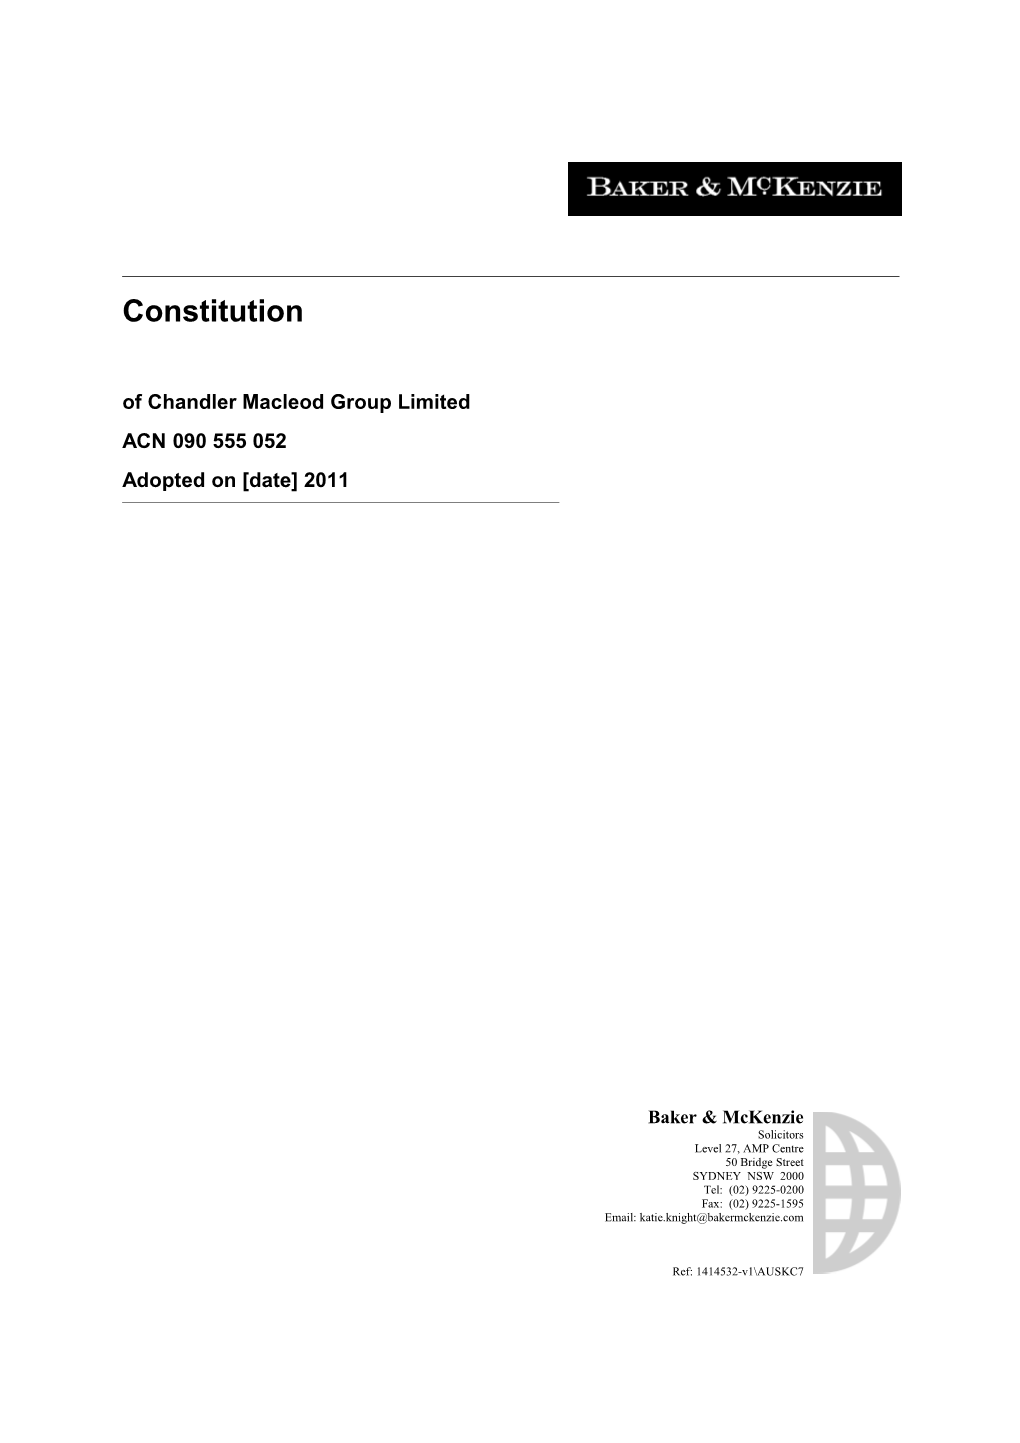 PREMIUM RECALL-4468-V1-Constitution of Public Listed Company__(GS3 07-04)